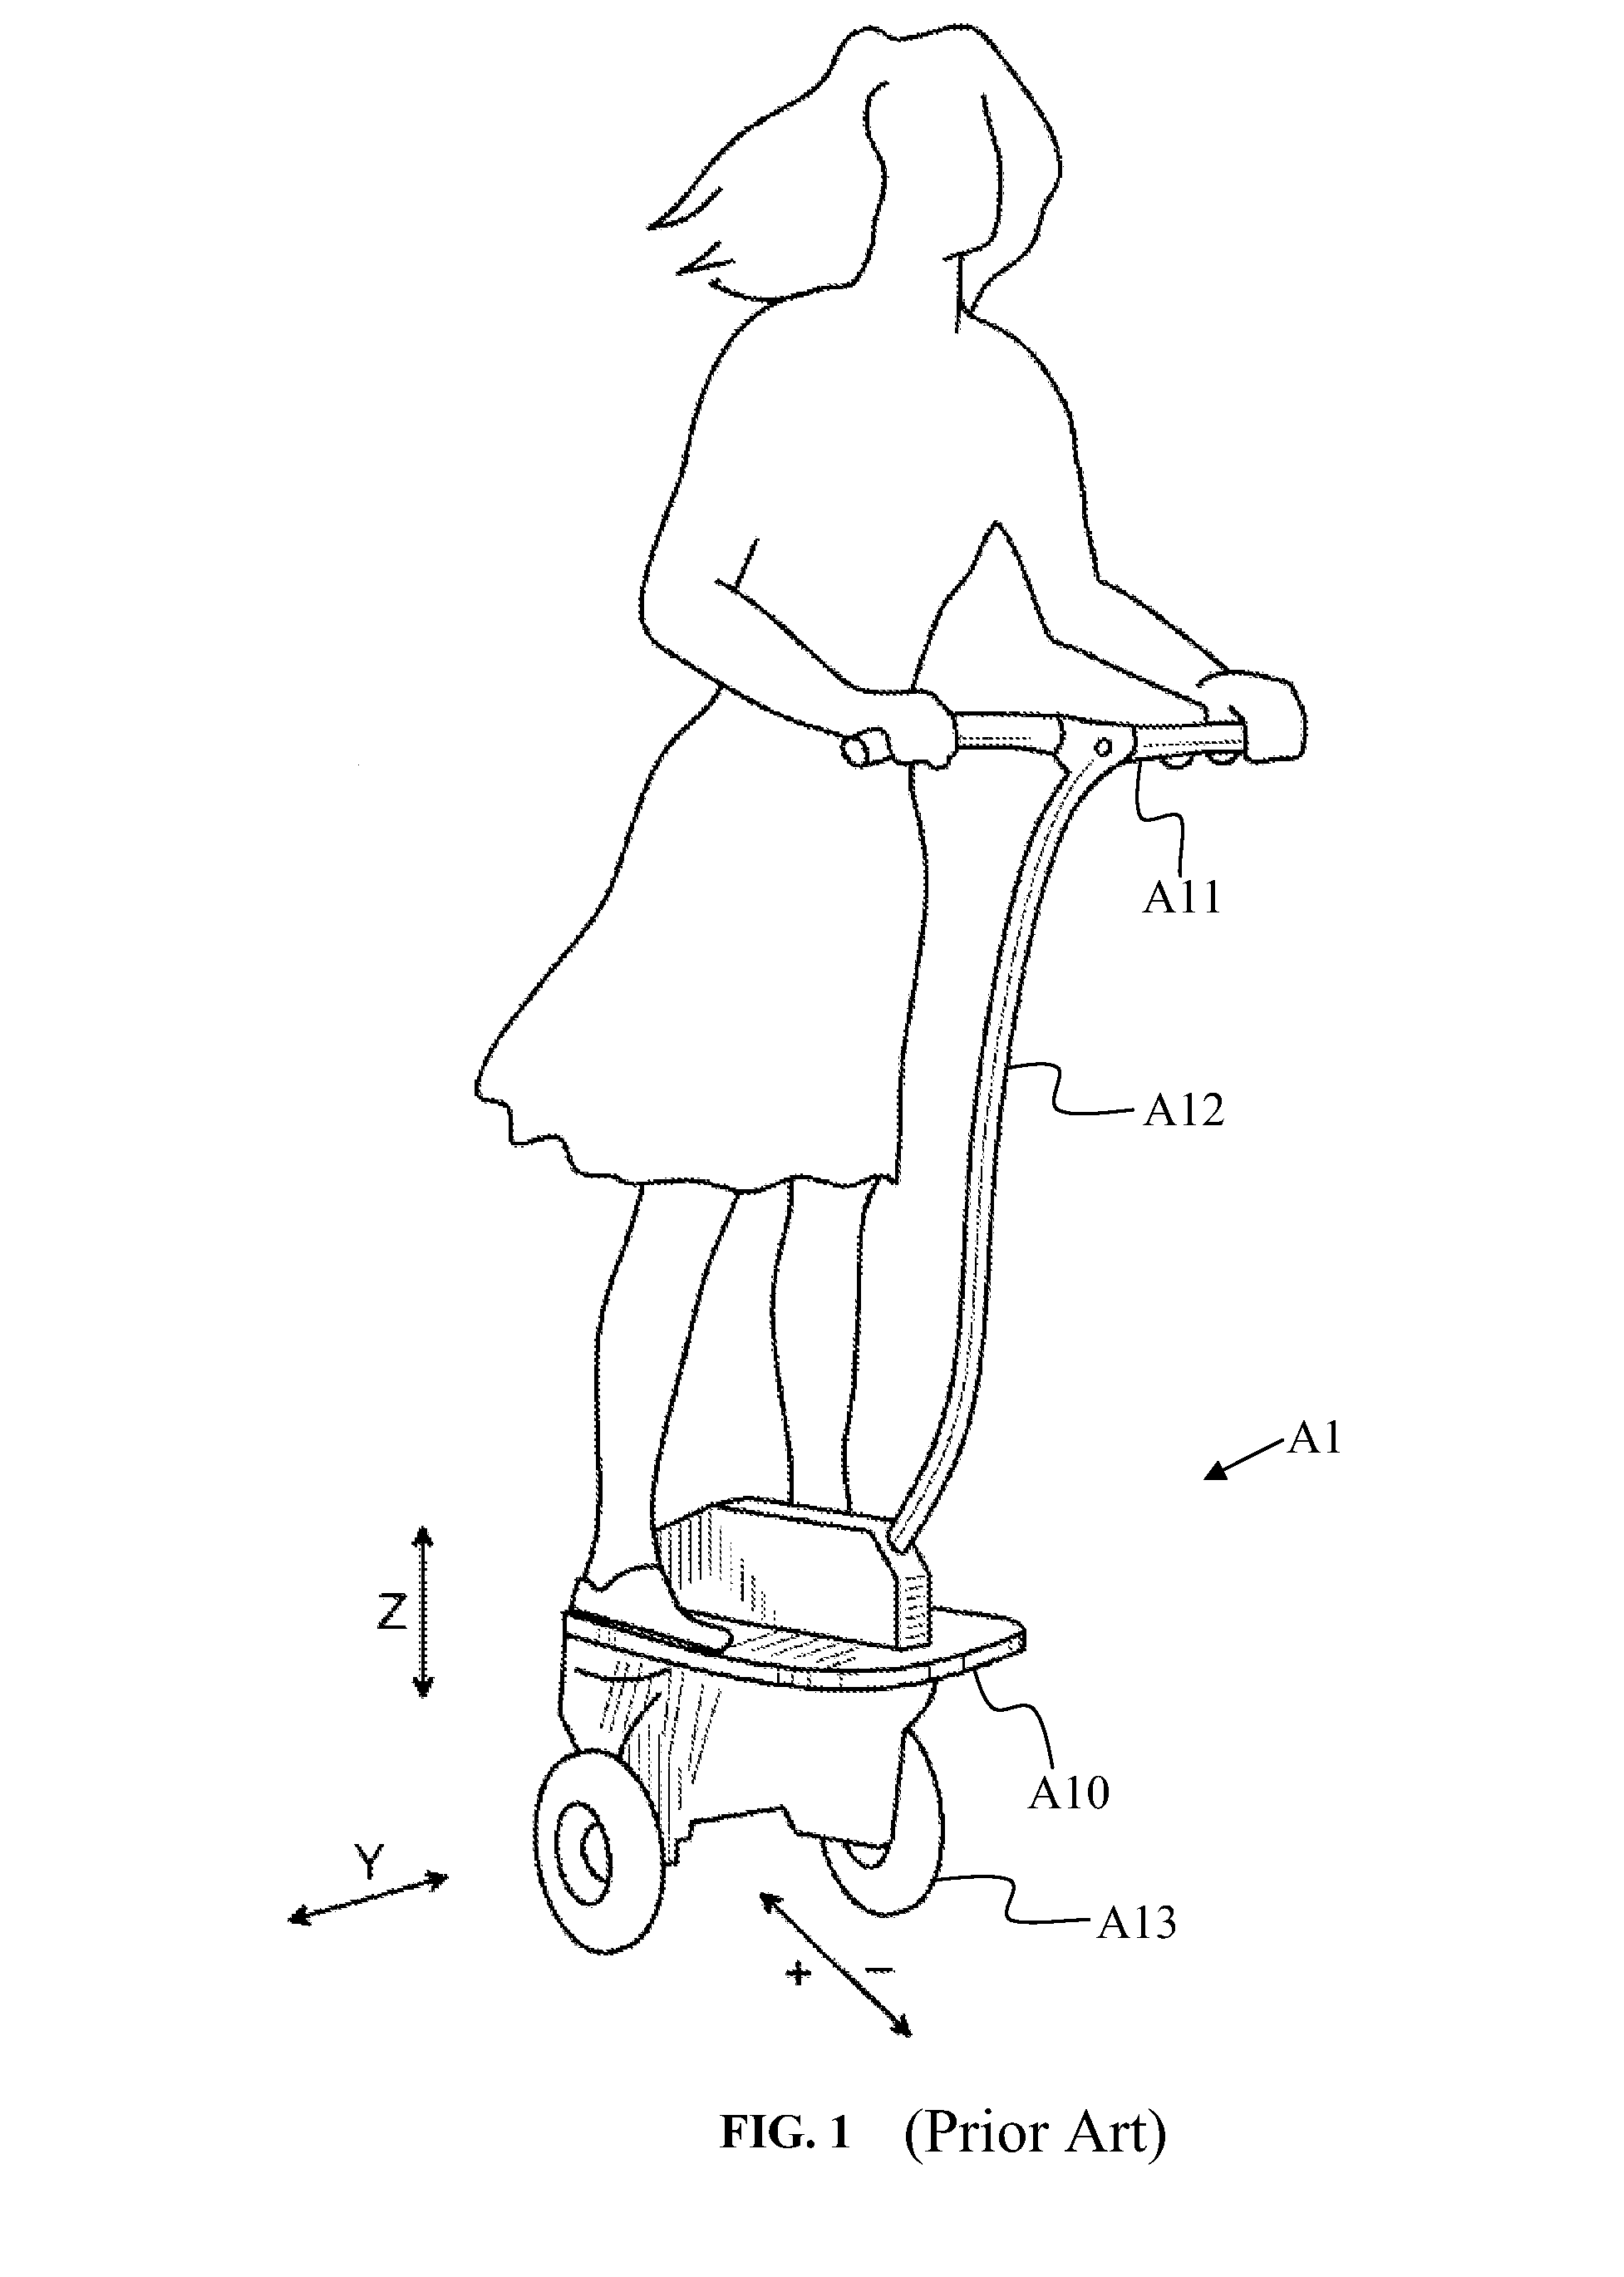 Human powered and electricity balanced personal vehicle